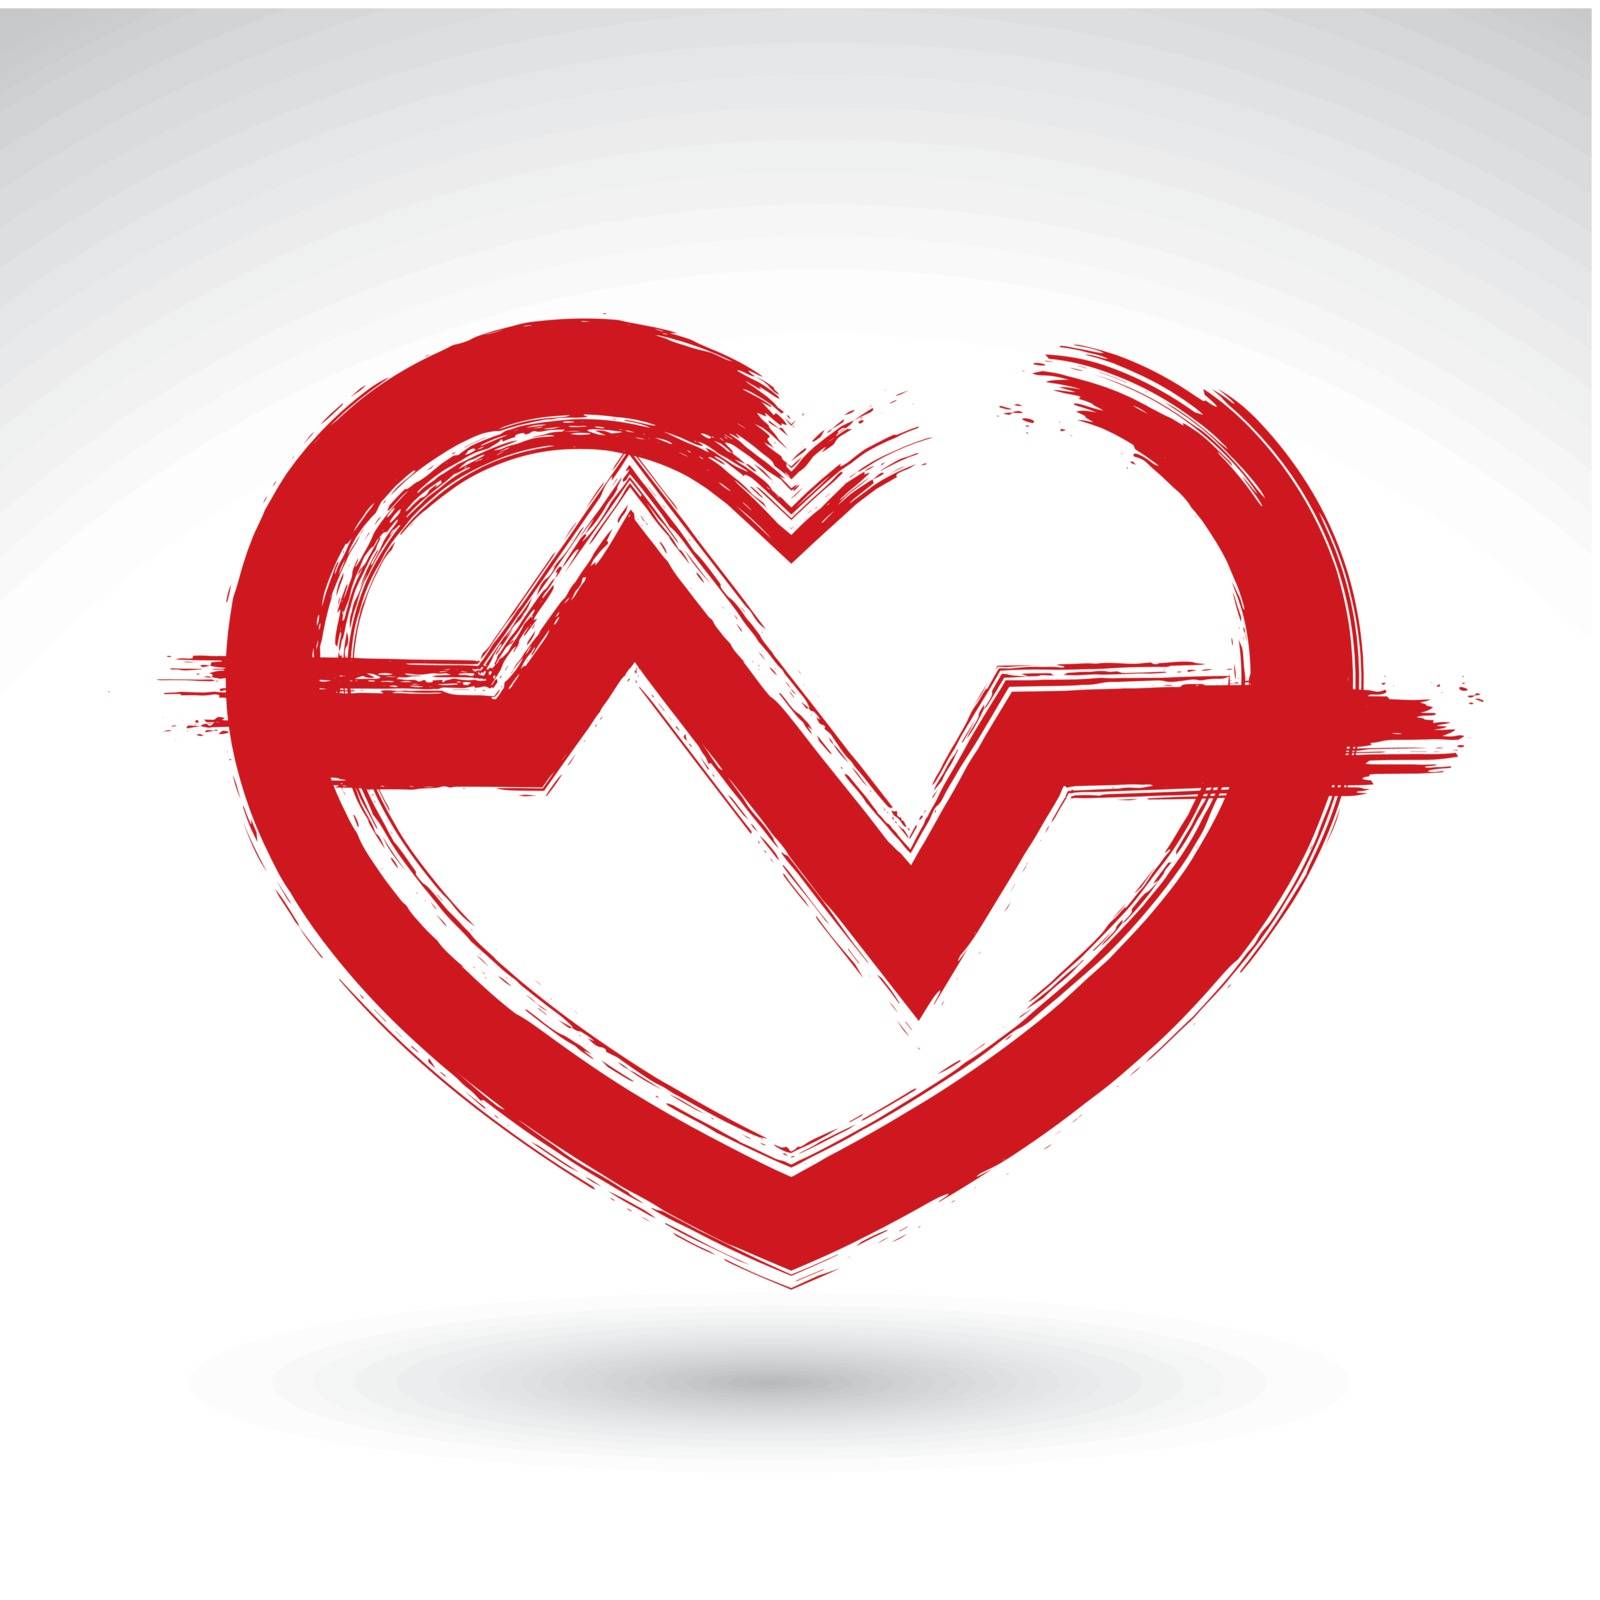 Hand drawn red heart icon, brush drawing heart sign with electrocardiogram, original hand-painted heart symbol with ekg isolated on white background.